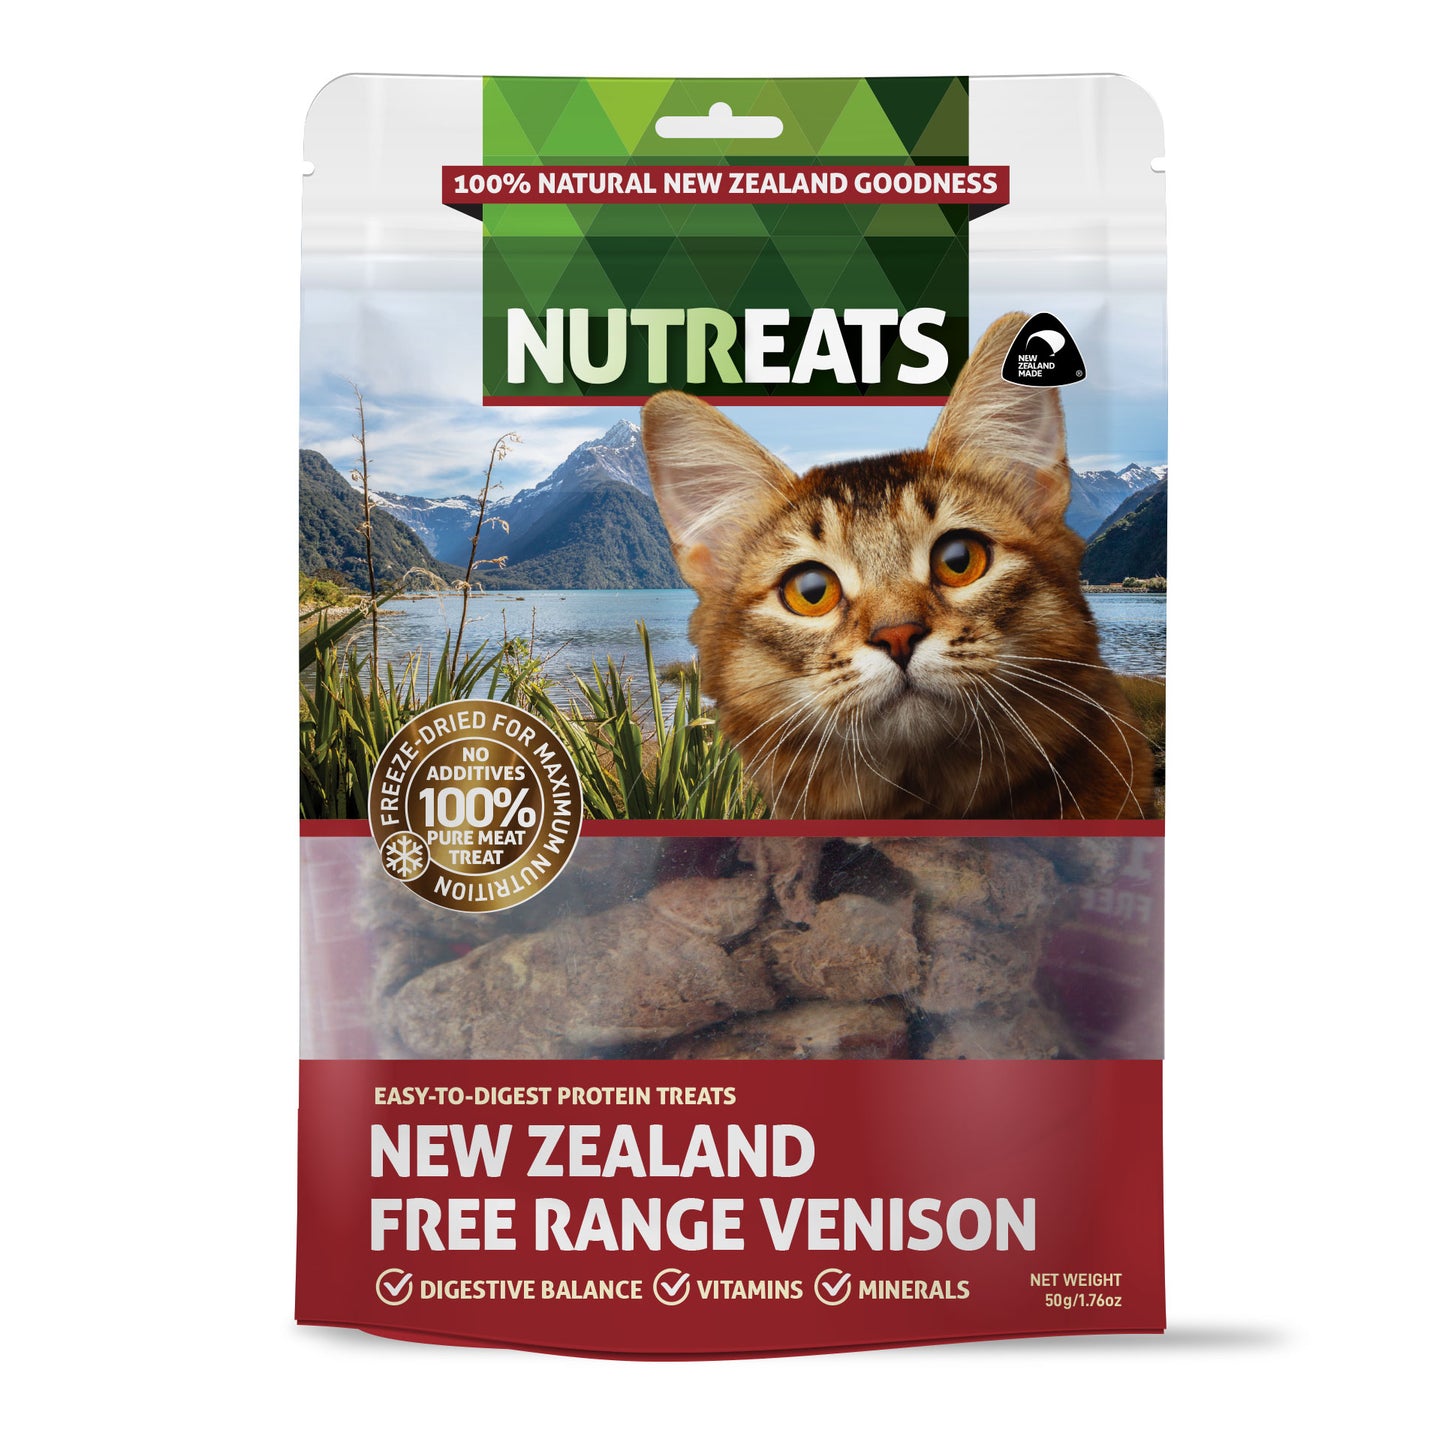 New Zealand Free Range Venison cat treats. Easy to digest and supporting naturally healthy digestion, rich in minerals and vitamins. This 100% natural treat made with premium free range New Zealand venison.